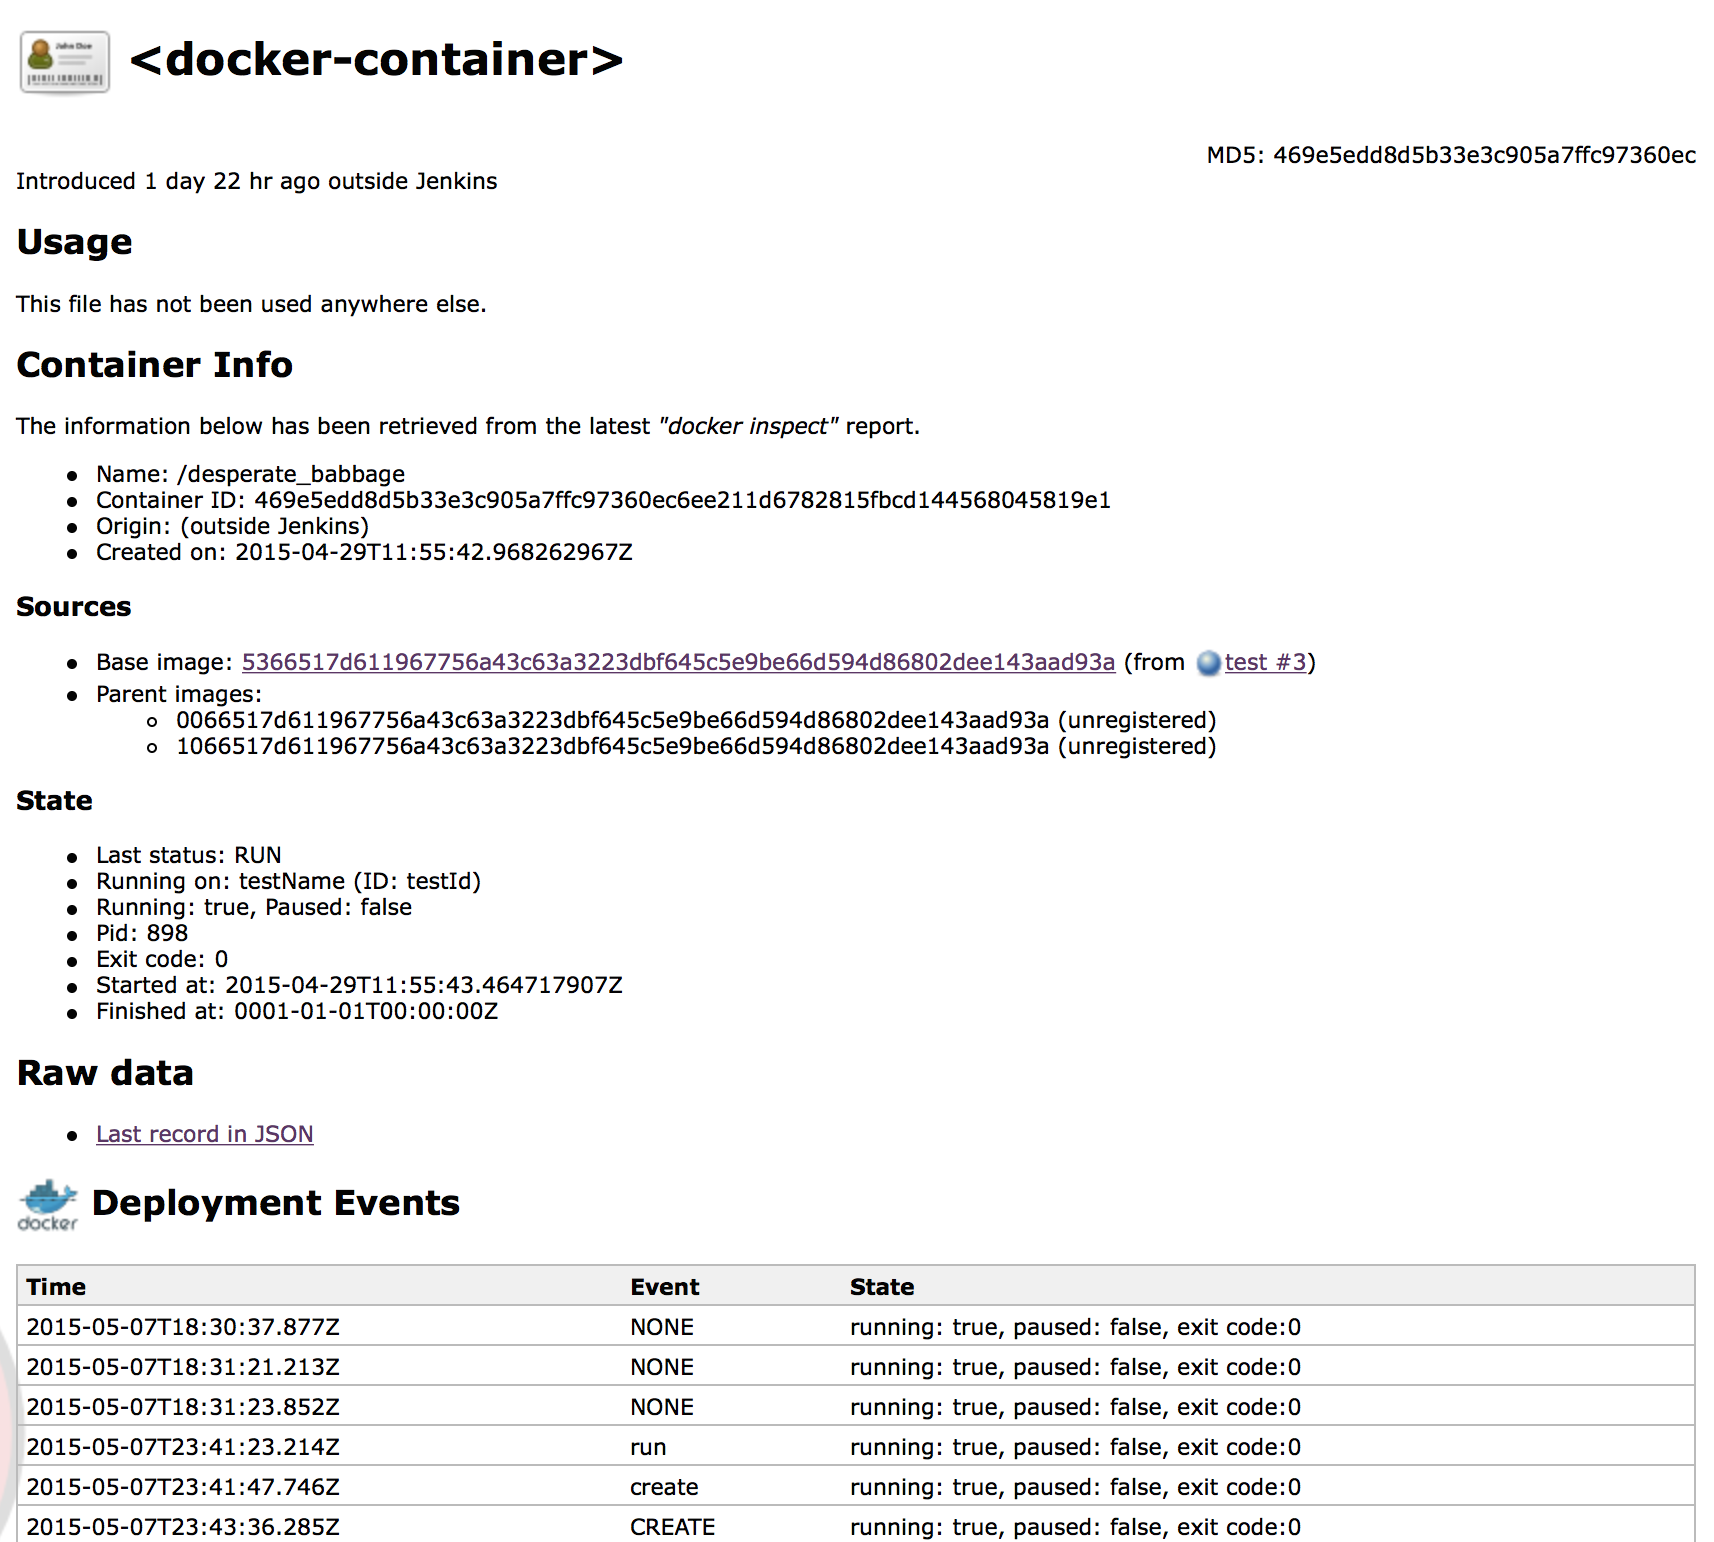 Figure 2. Container info and deployment events on the container page